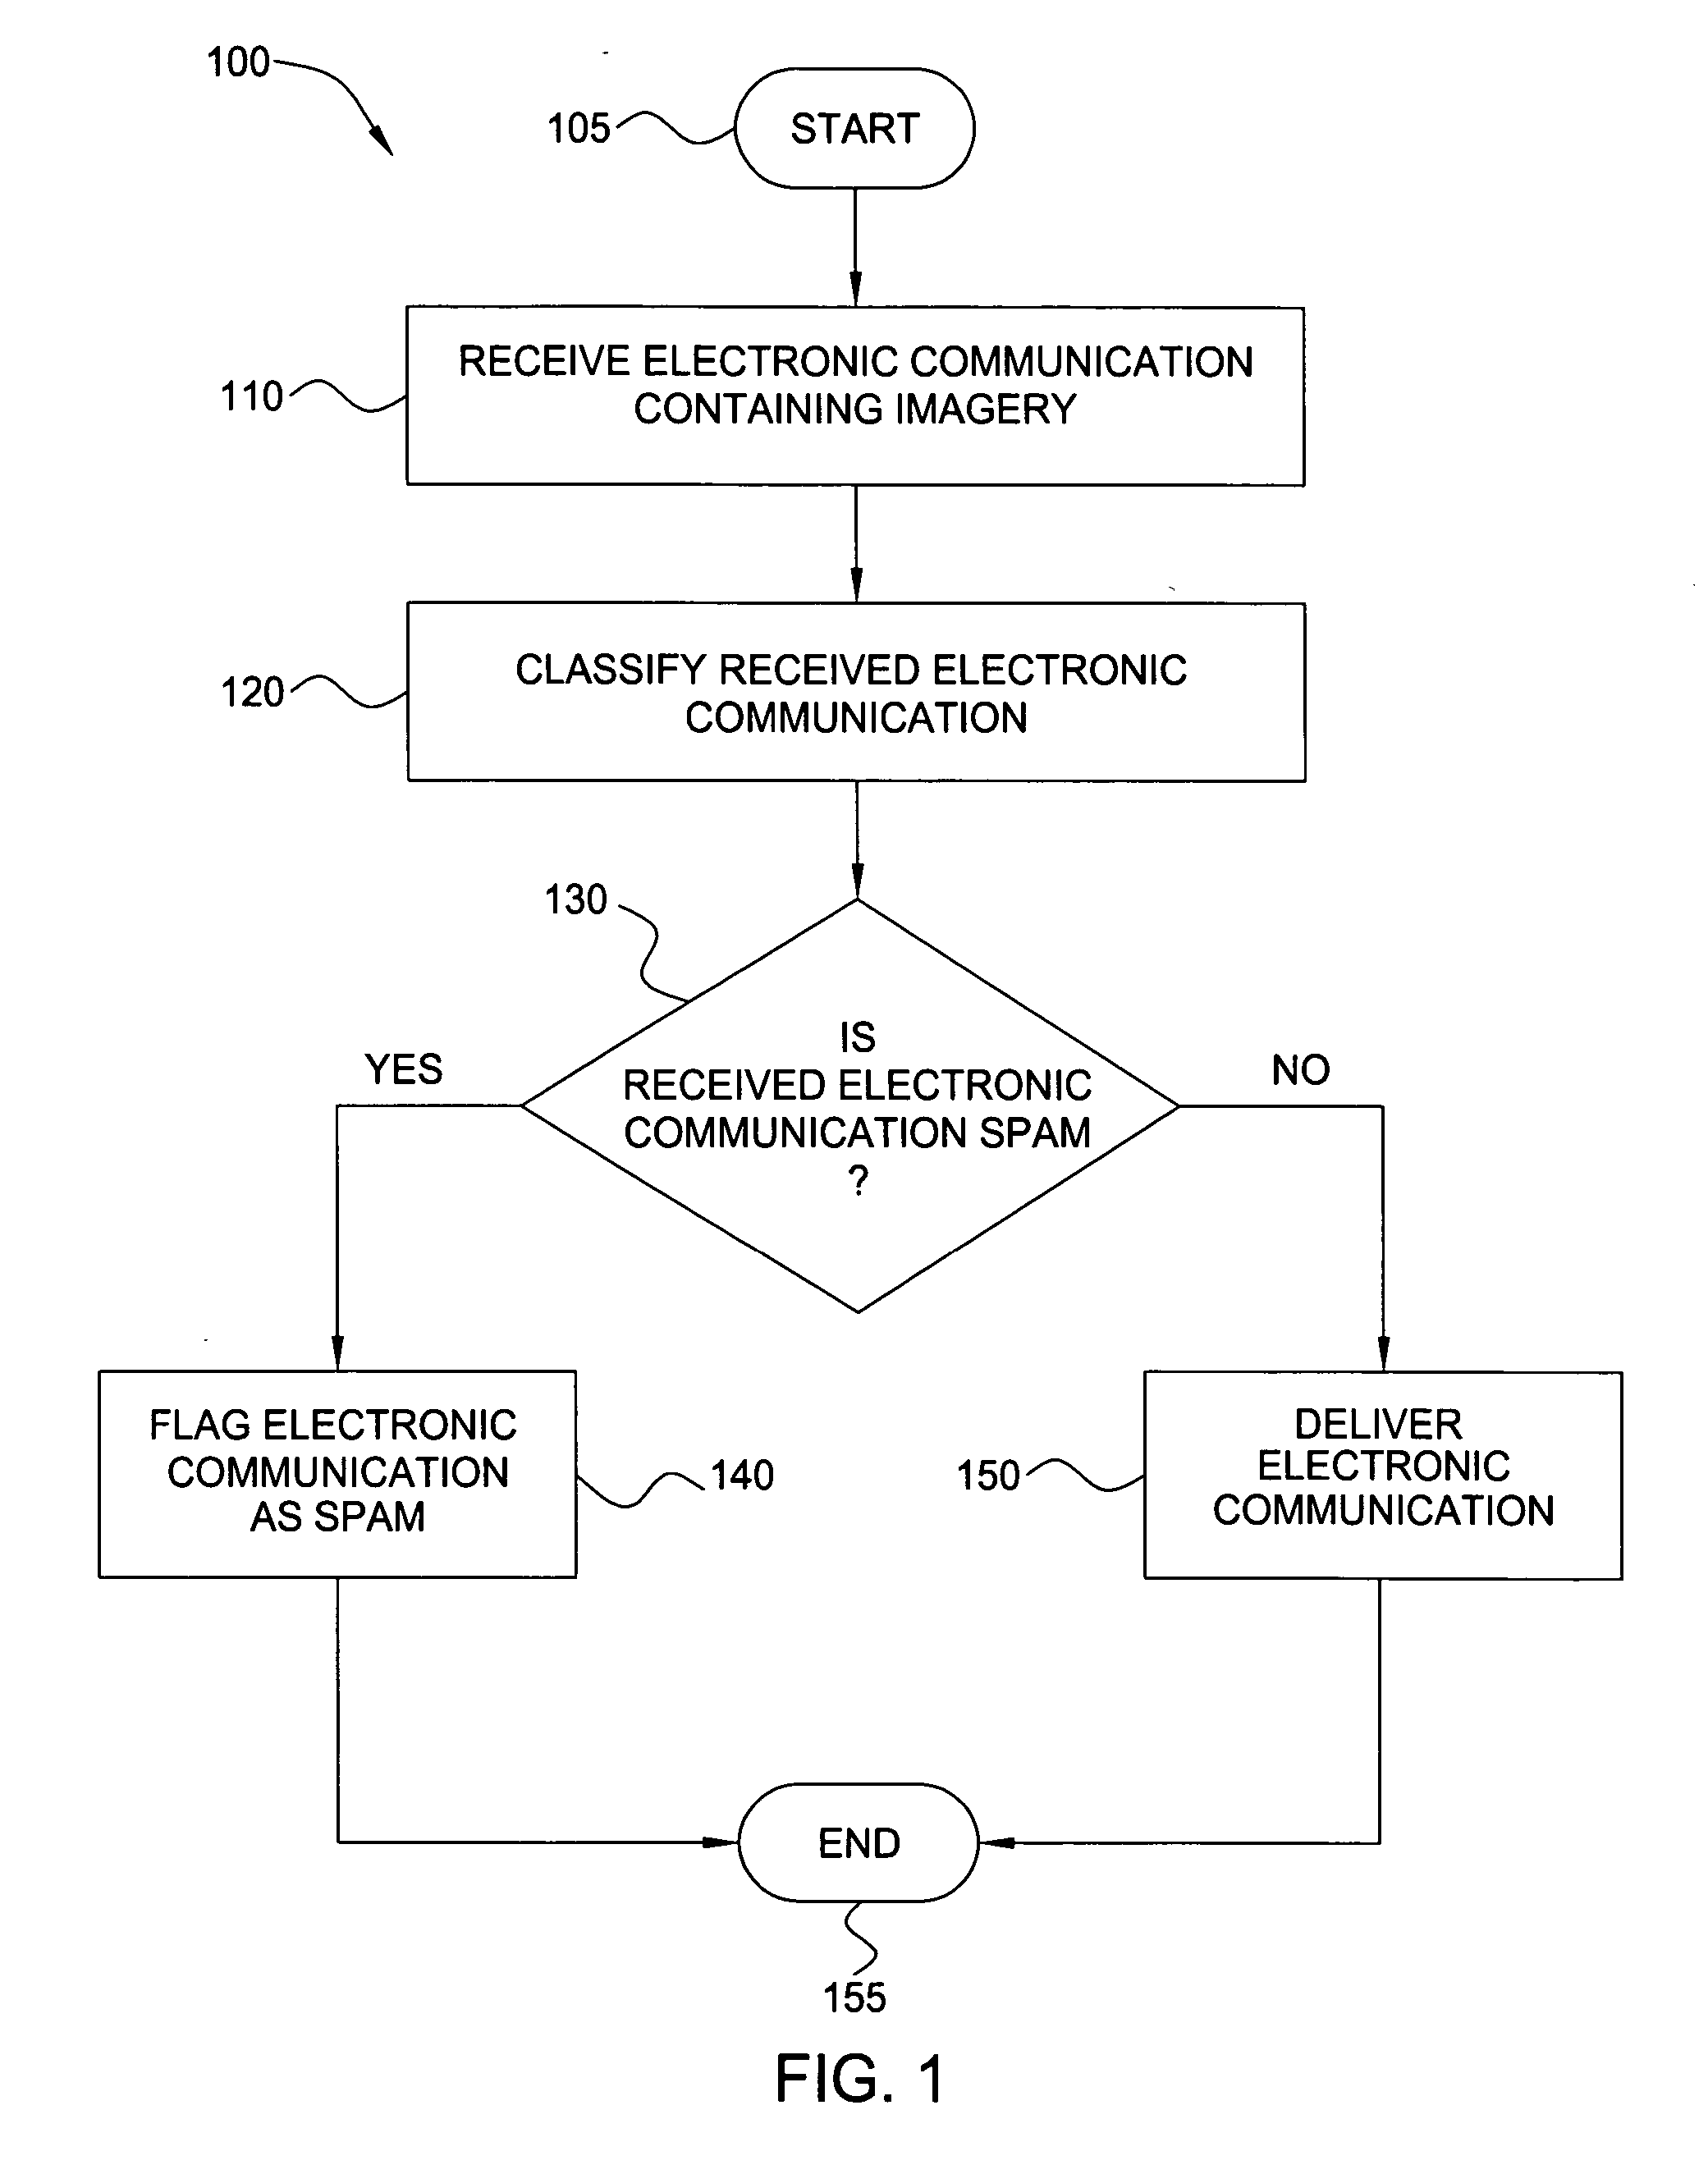 Method and apparatus for analysis of electronic communications containing imagery